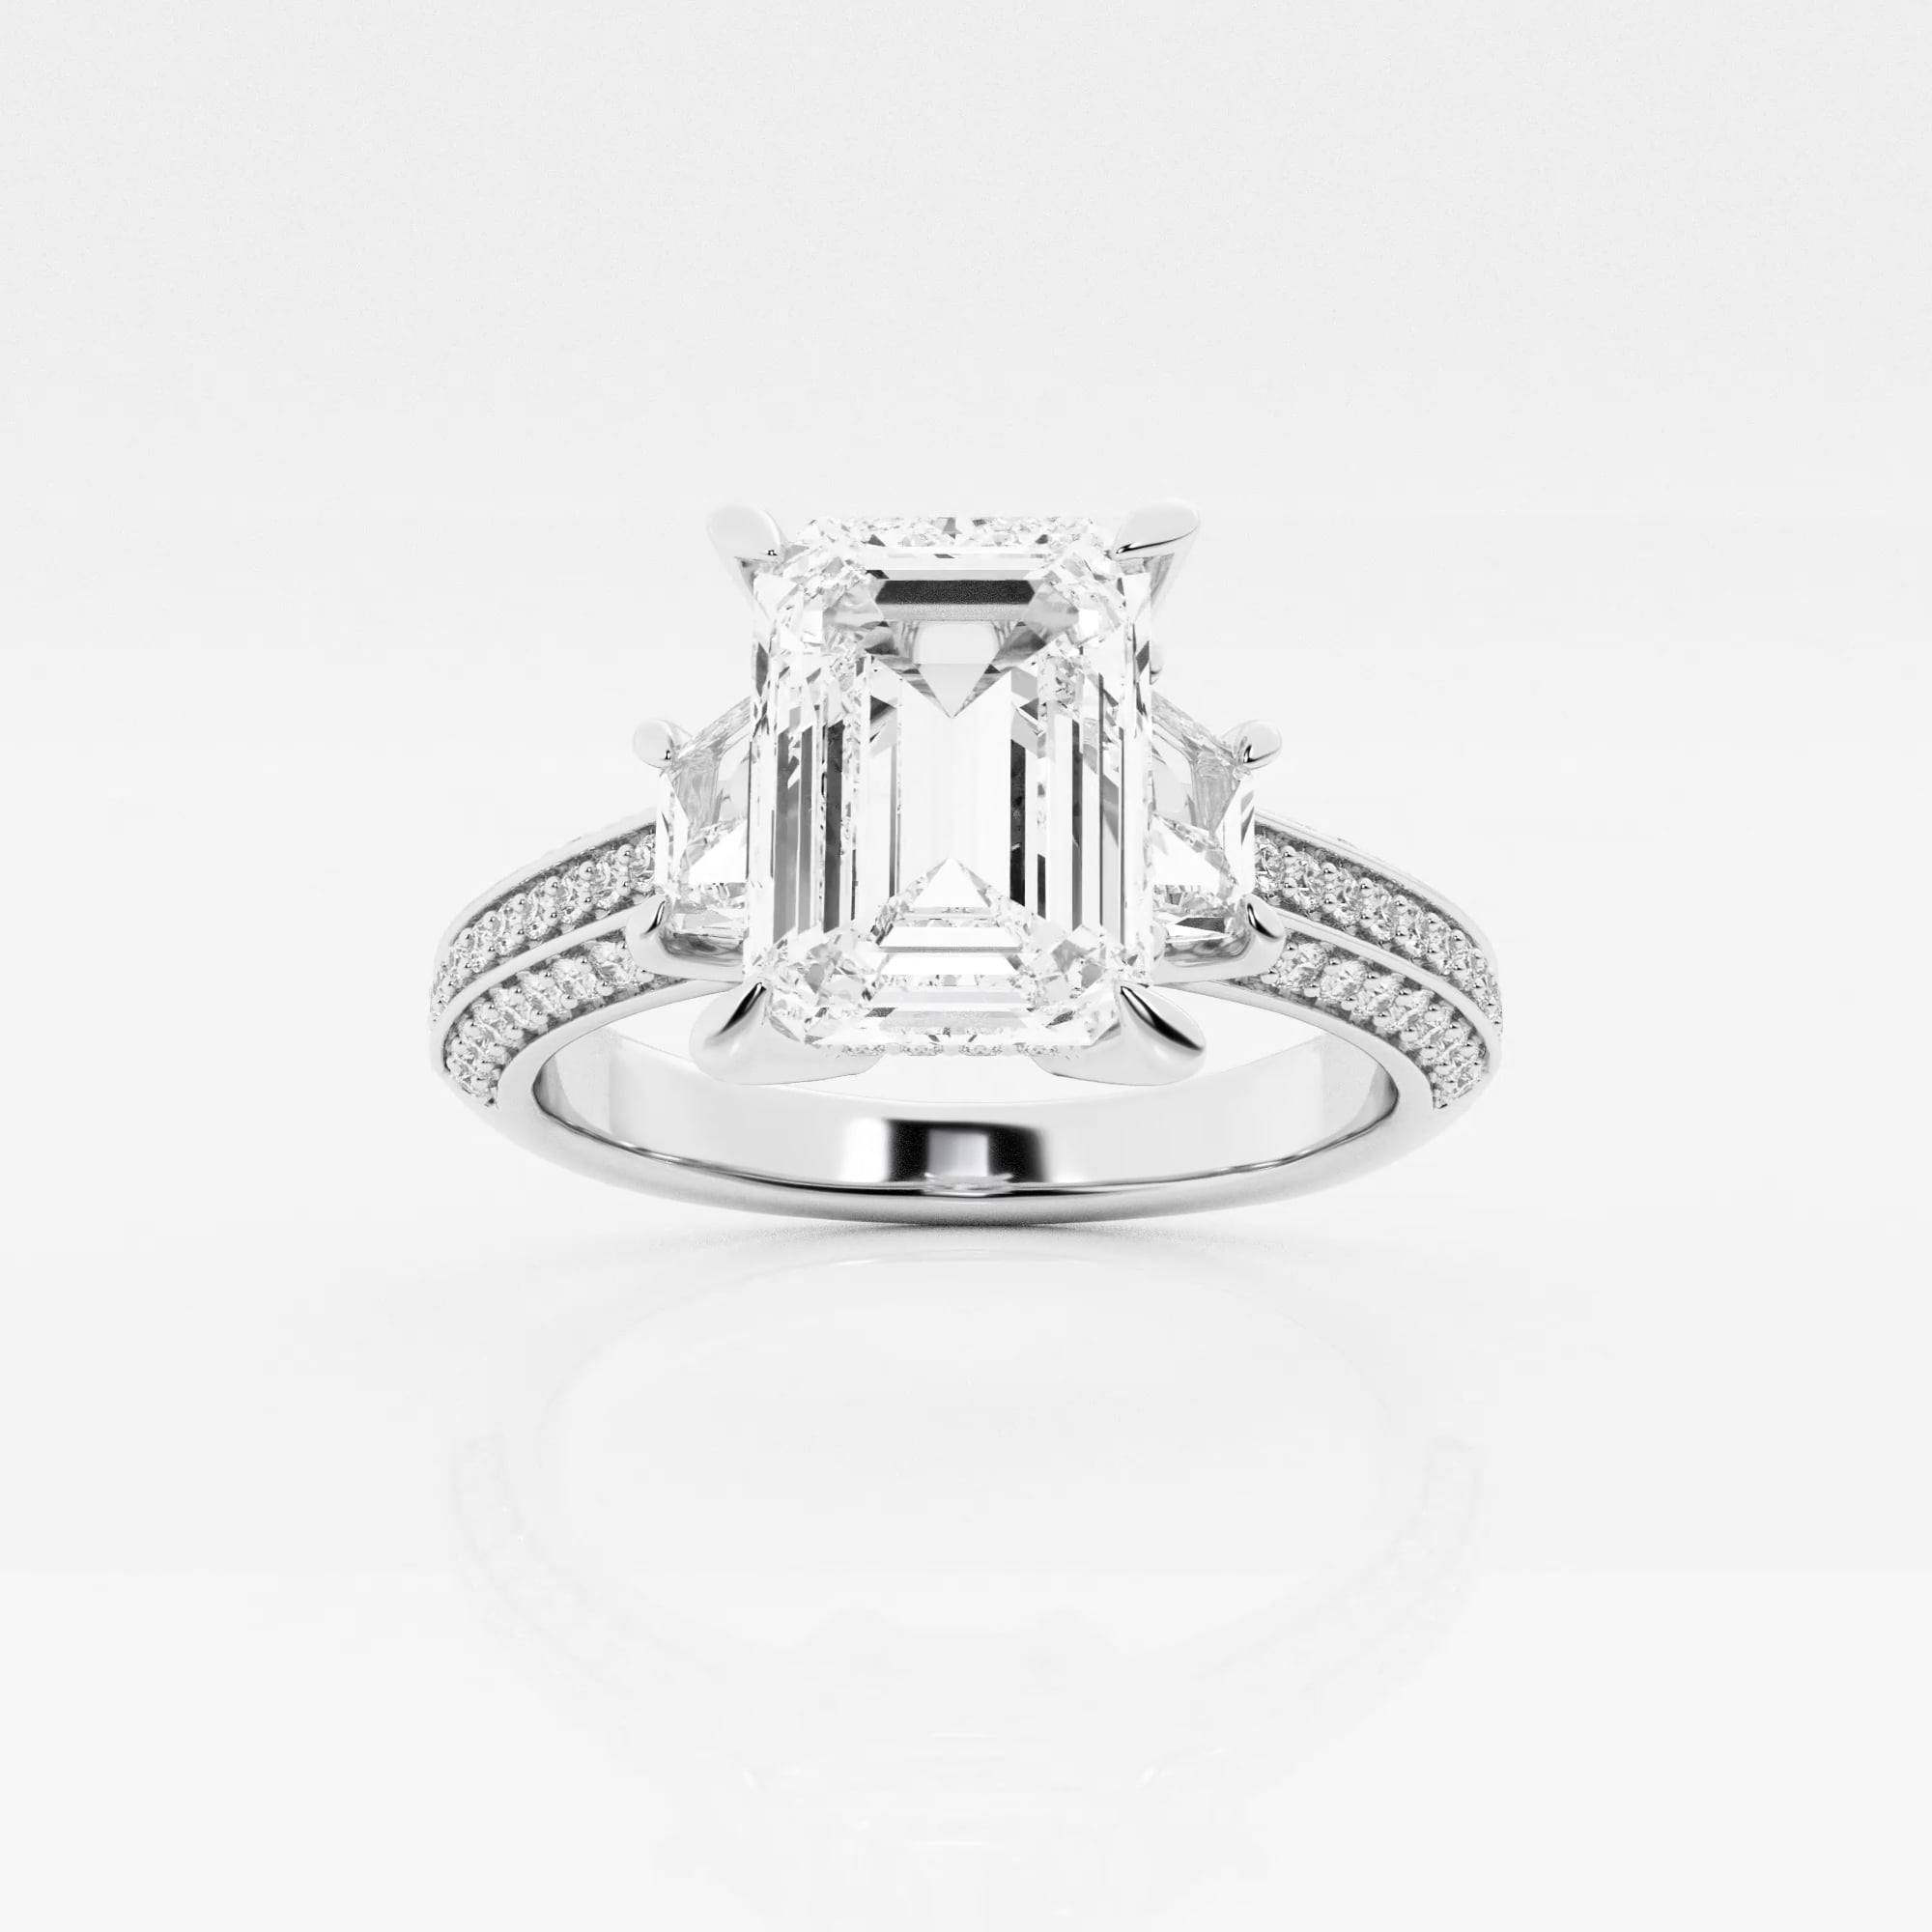 product video for Badgley Mischka Near-Colorless 2 7/8 ctw Emerald Lab Grown Diamond Engagement Ring